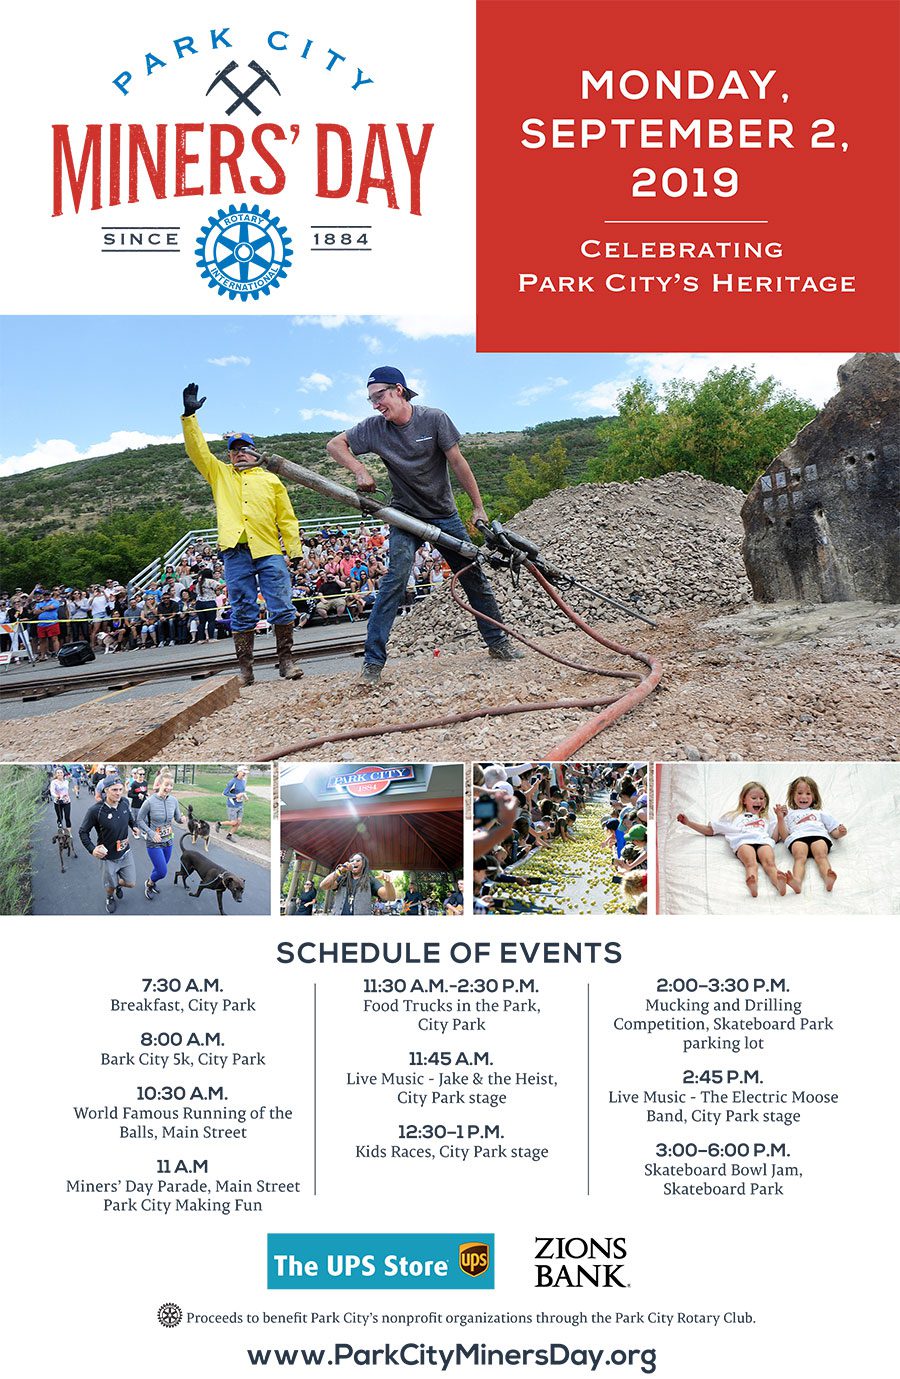 Making FUN in Park City is the theme of the annual Miners’ Day parade down historic Main Street, attracting marching bands and community floats as Park City celebrates its mining heritage.  Put your blanket down on the curb with the kids and be ready for the fun. The parade is scheduled for 11:00 a.m., just after the annual Running of the Balls down Main Street. The parade route runs the length of Main Street, before skipping over to Park Avenue and on down to City Park.